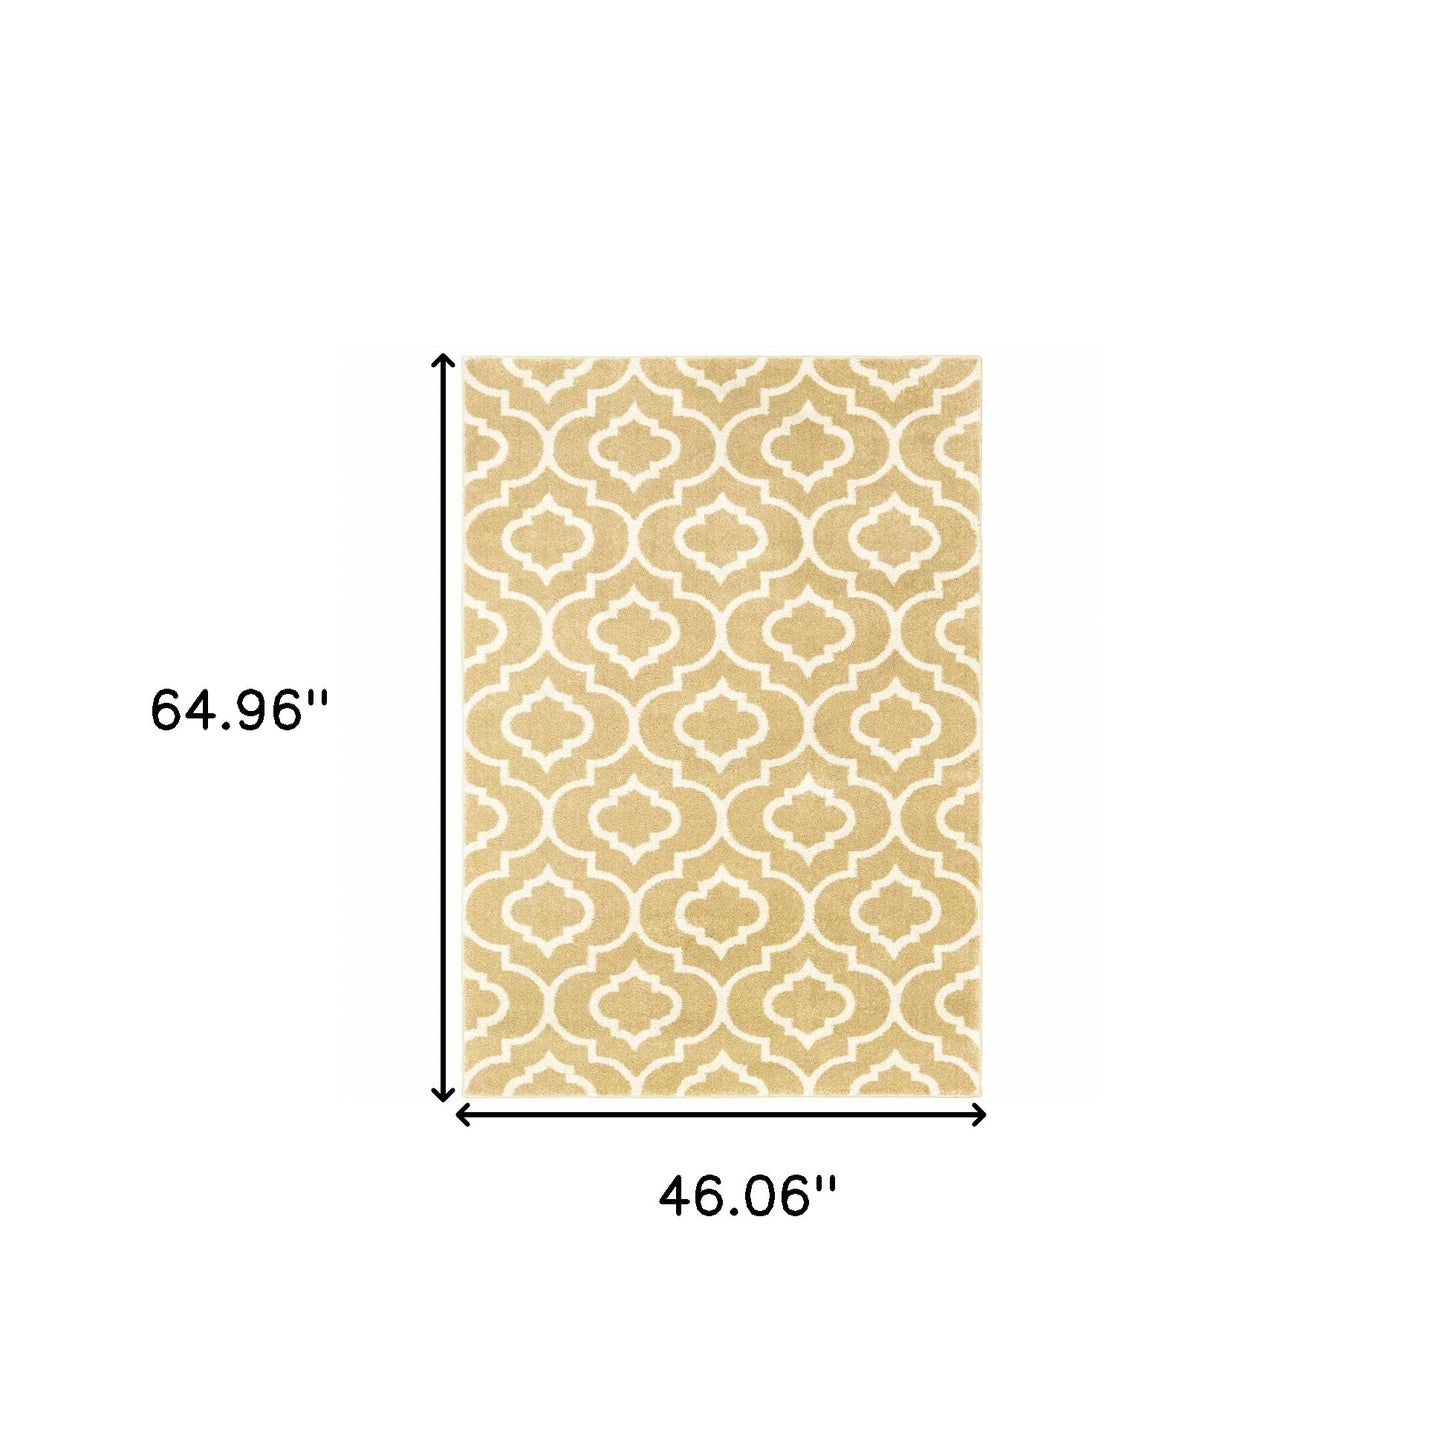 4' X 6' Gold And Ivory Geometric Power Loom Stain Resistant Area Rug